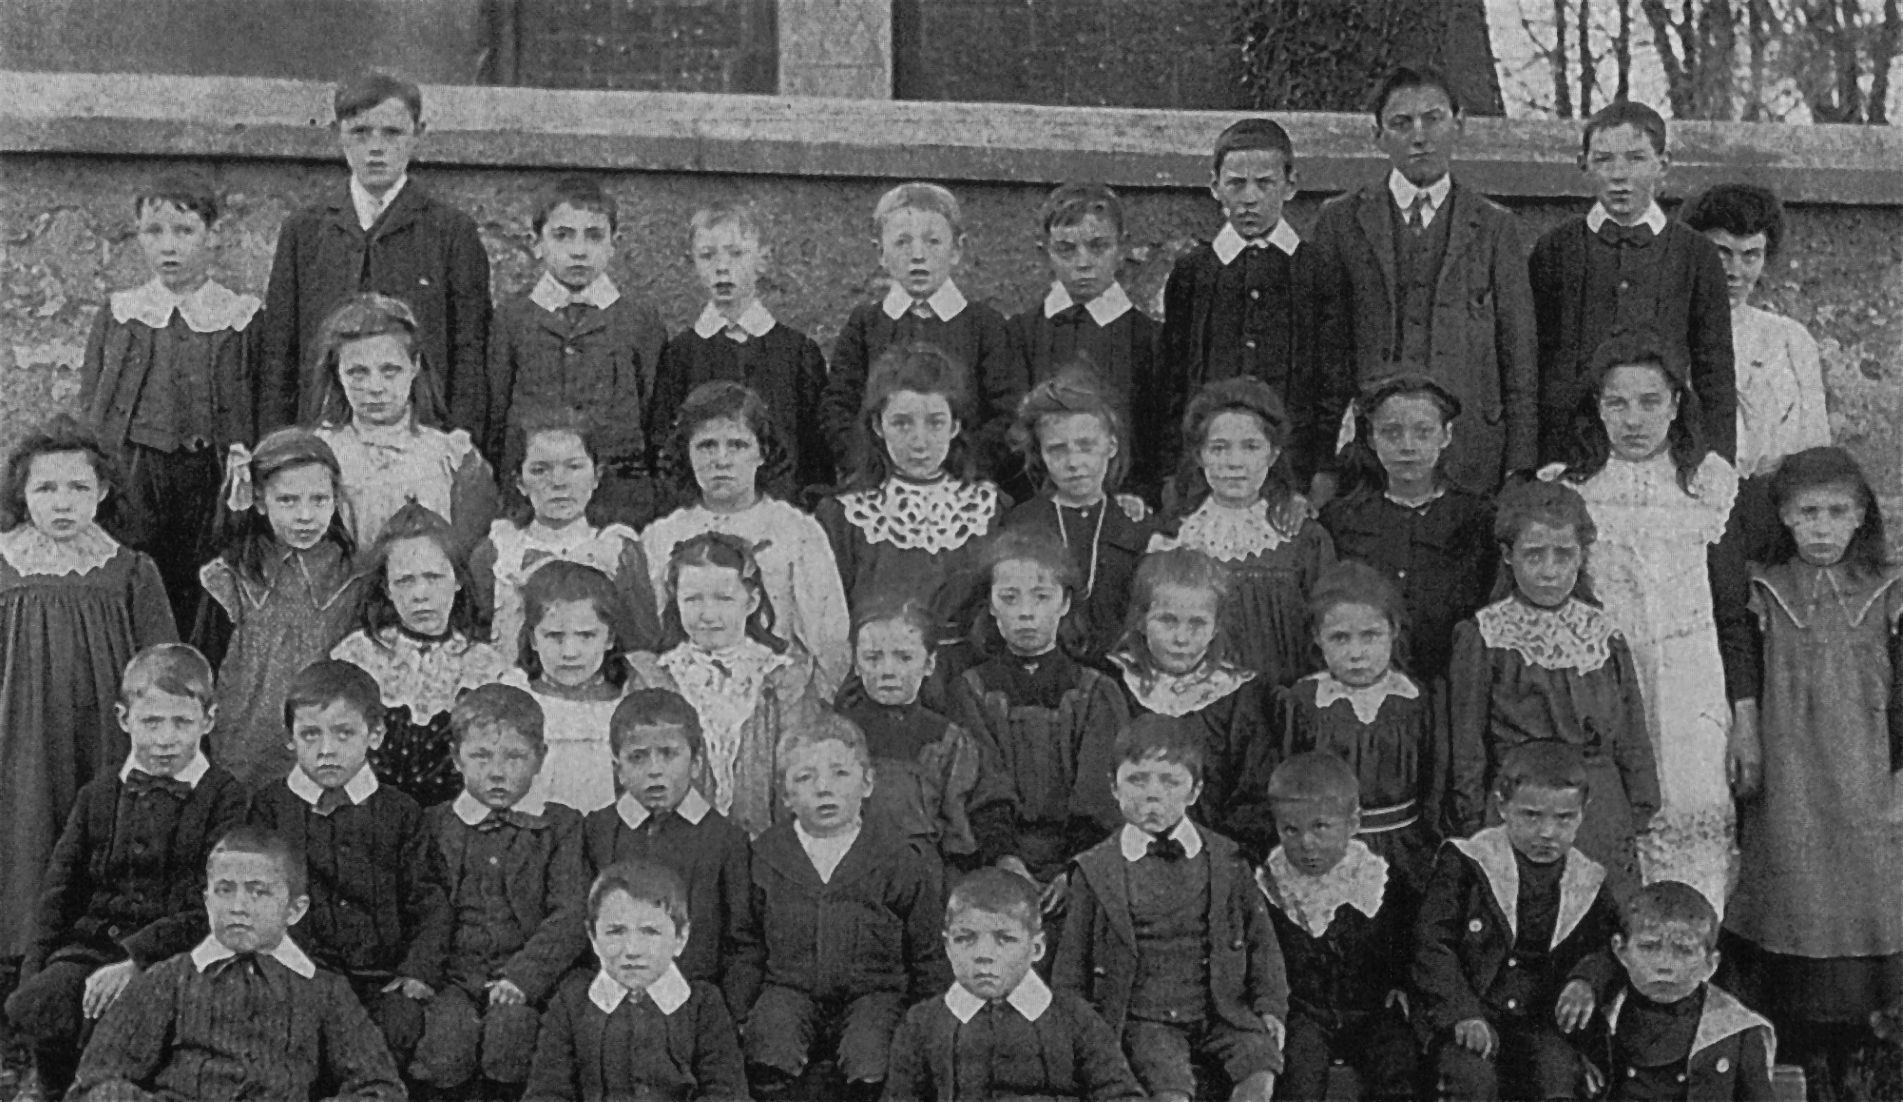 Aghadrumsee School photo of 1907